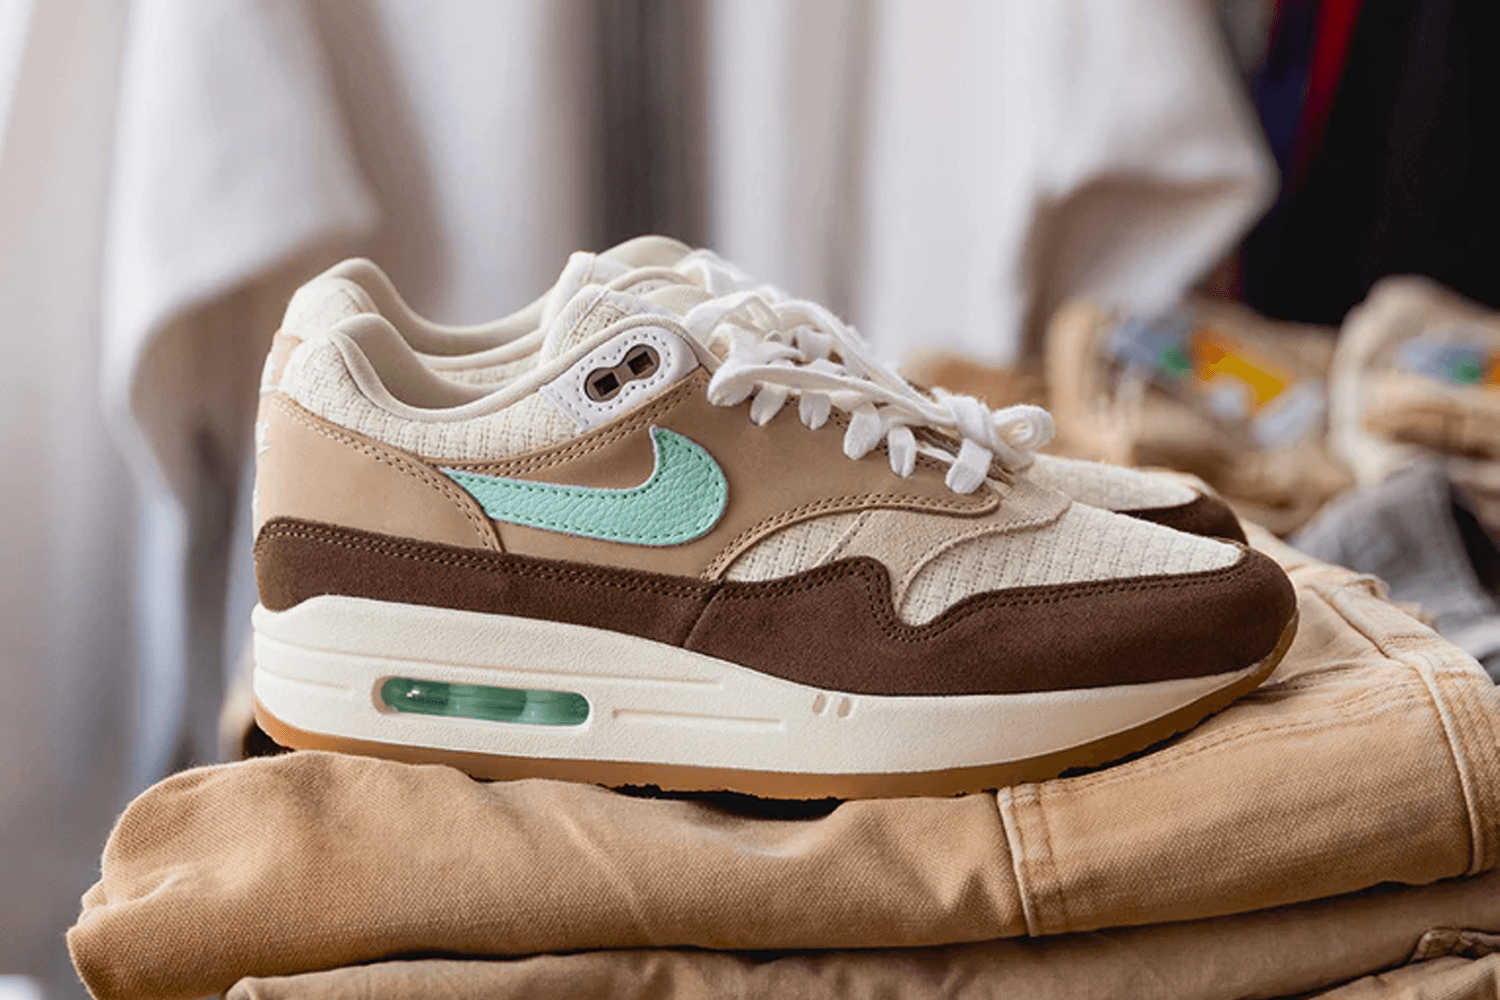 Our favorite Nike Air Max 1 releases of 2022